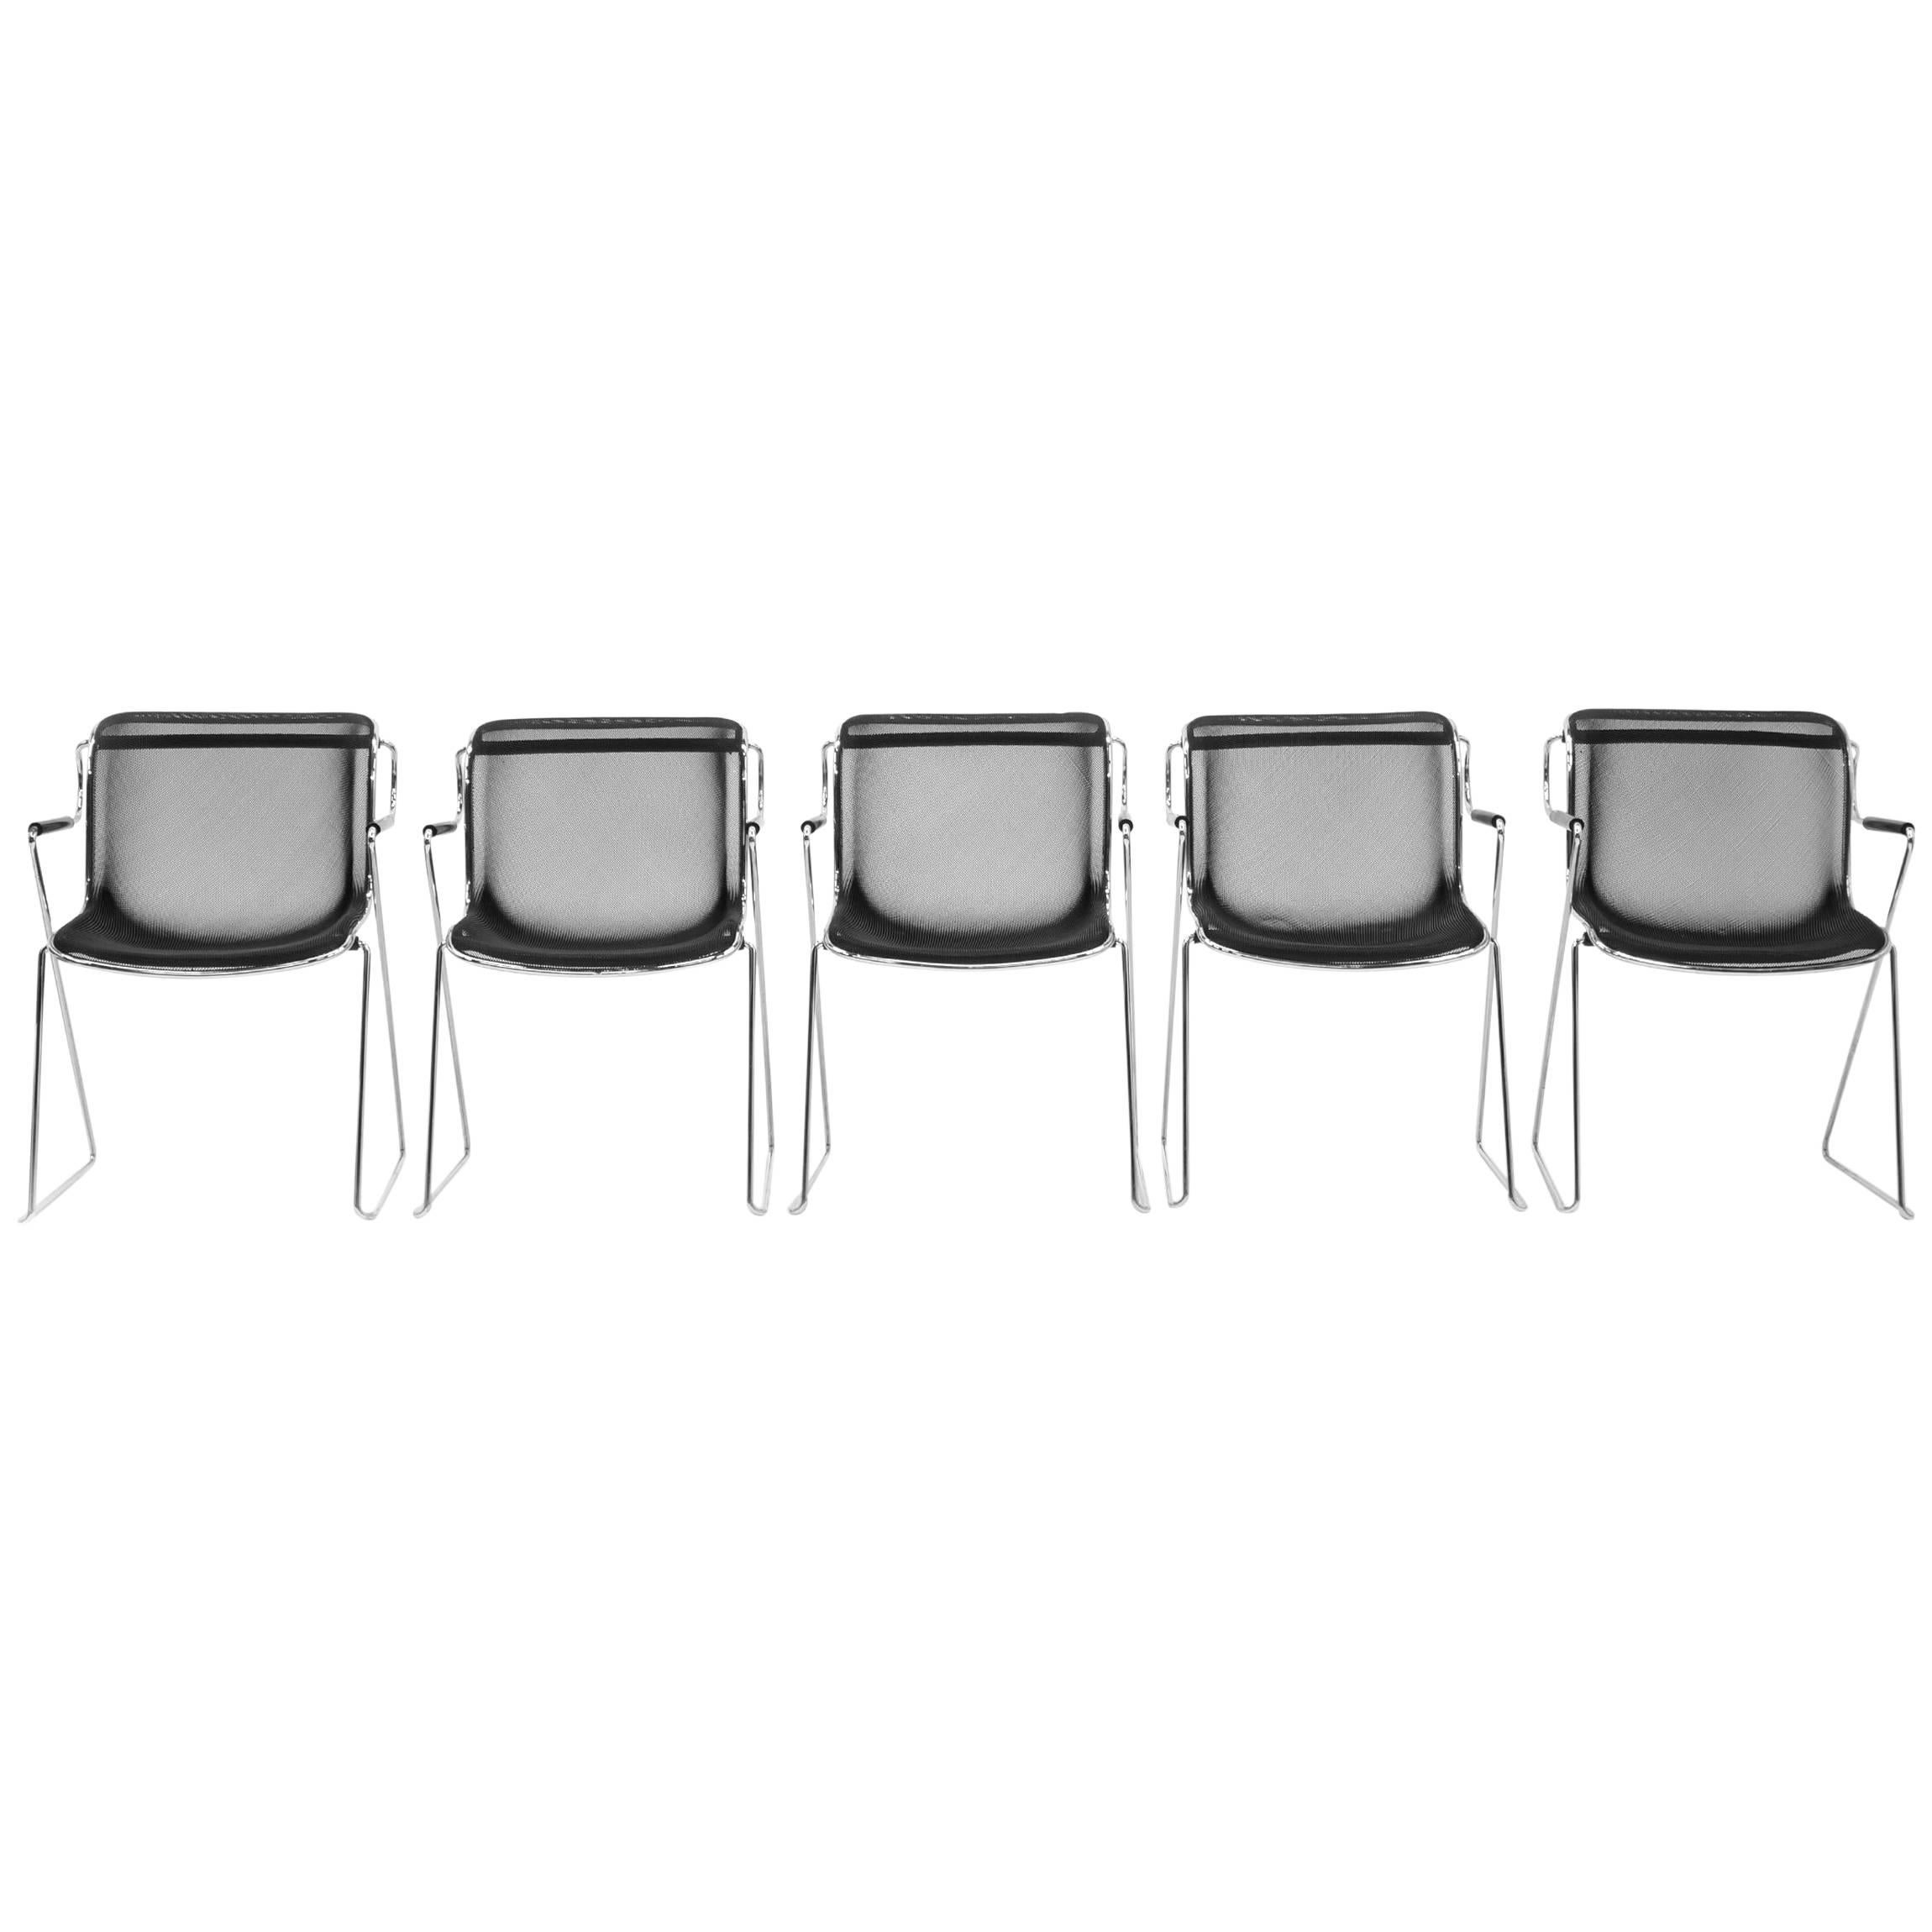 Charles Pollockk Penelope Stacking or Stack Chairs For Sale